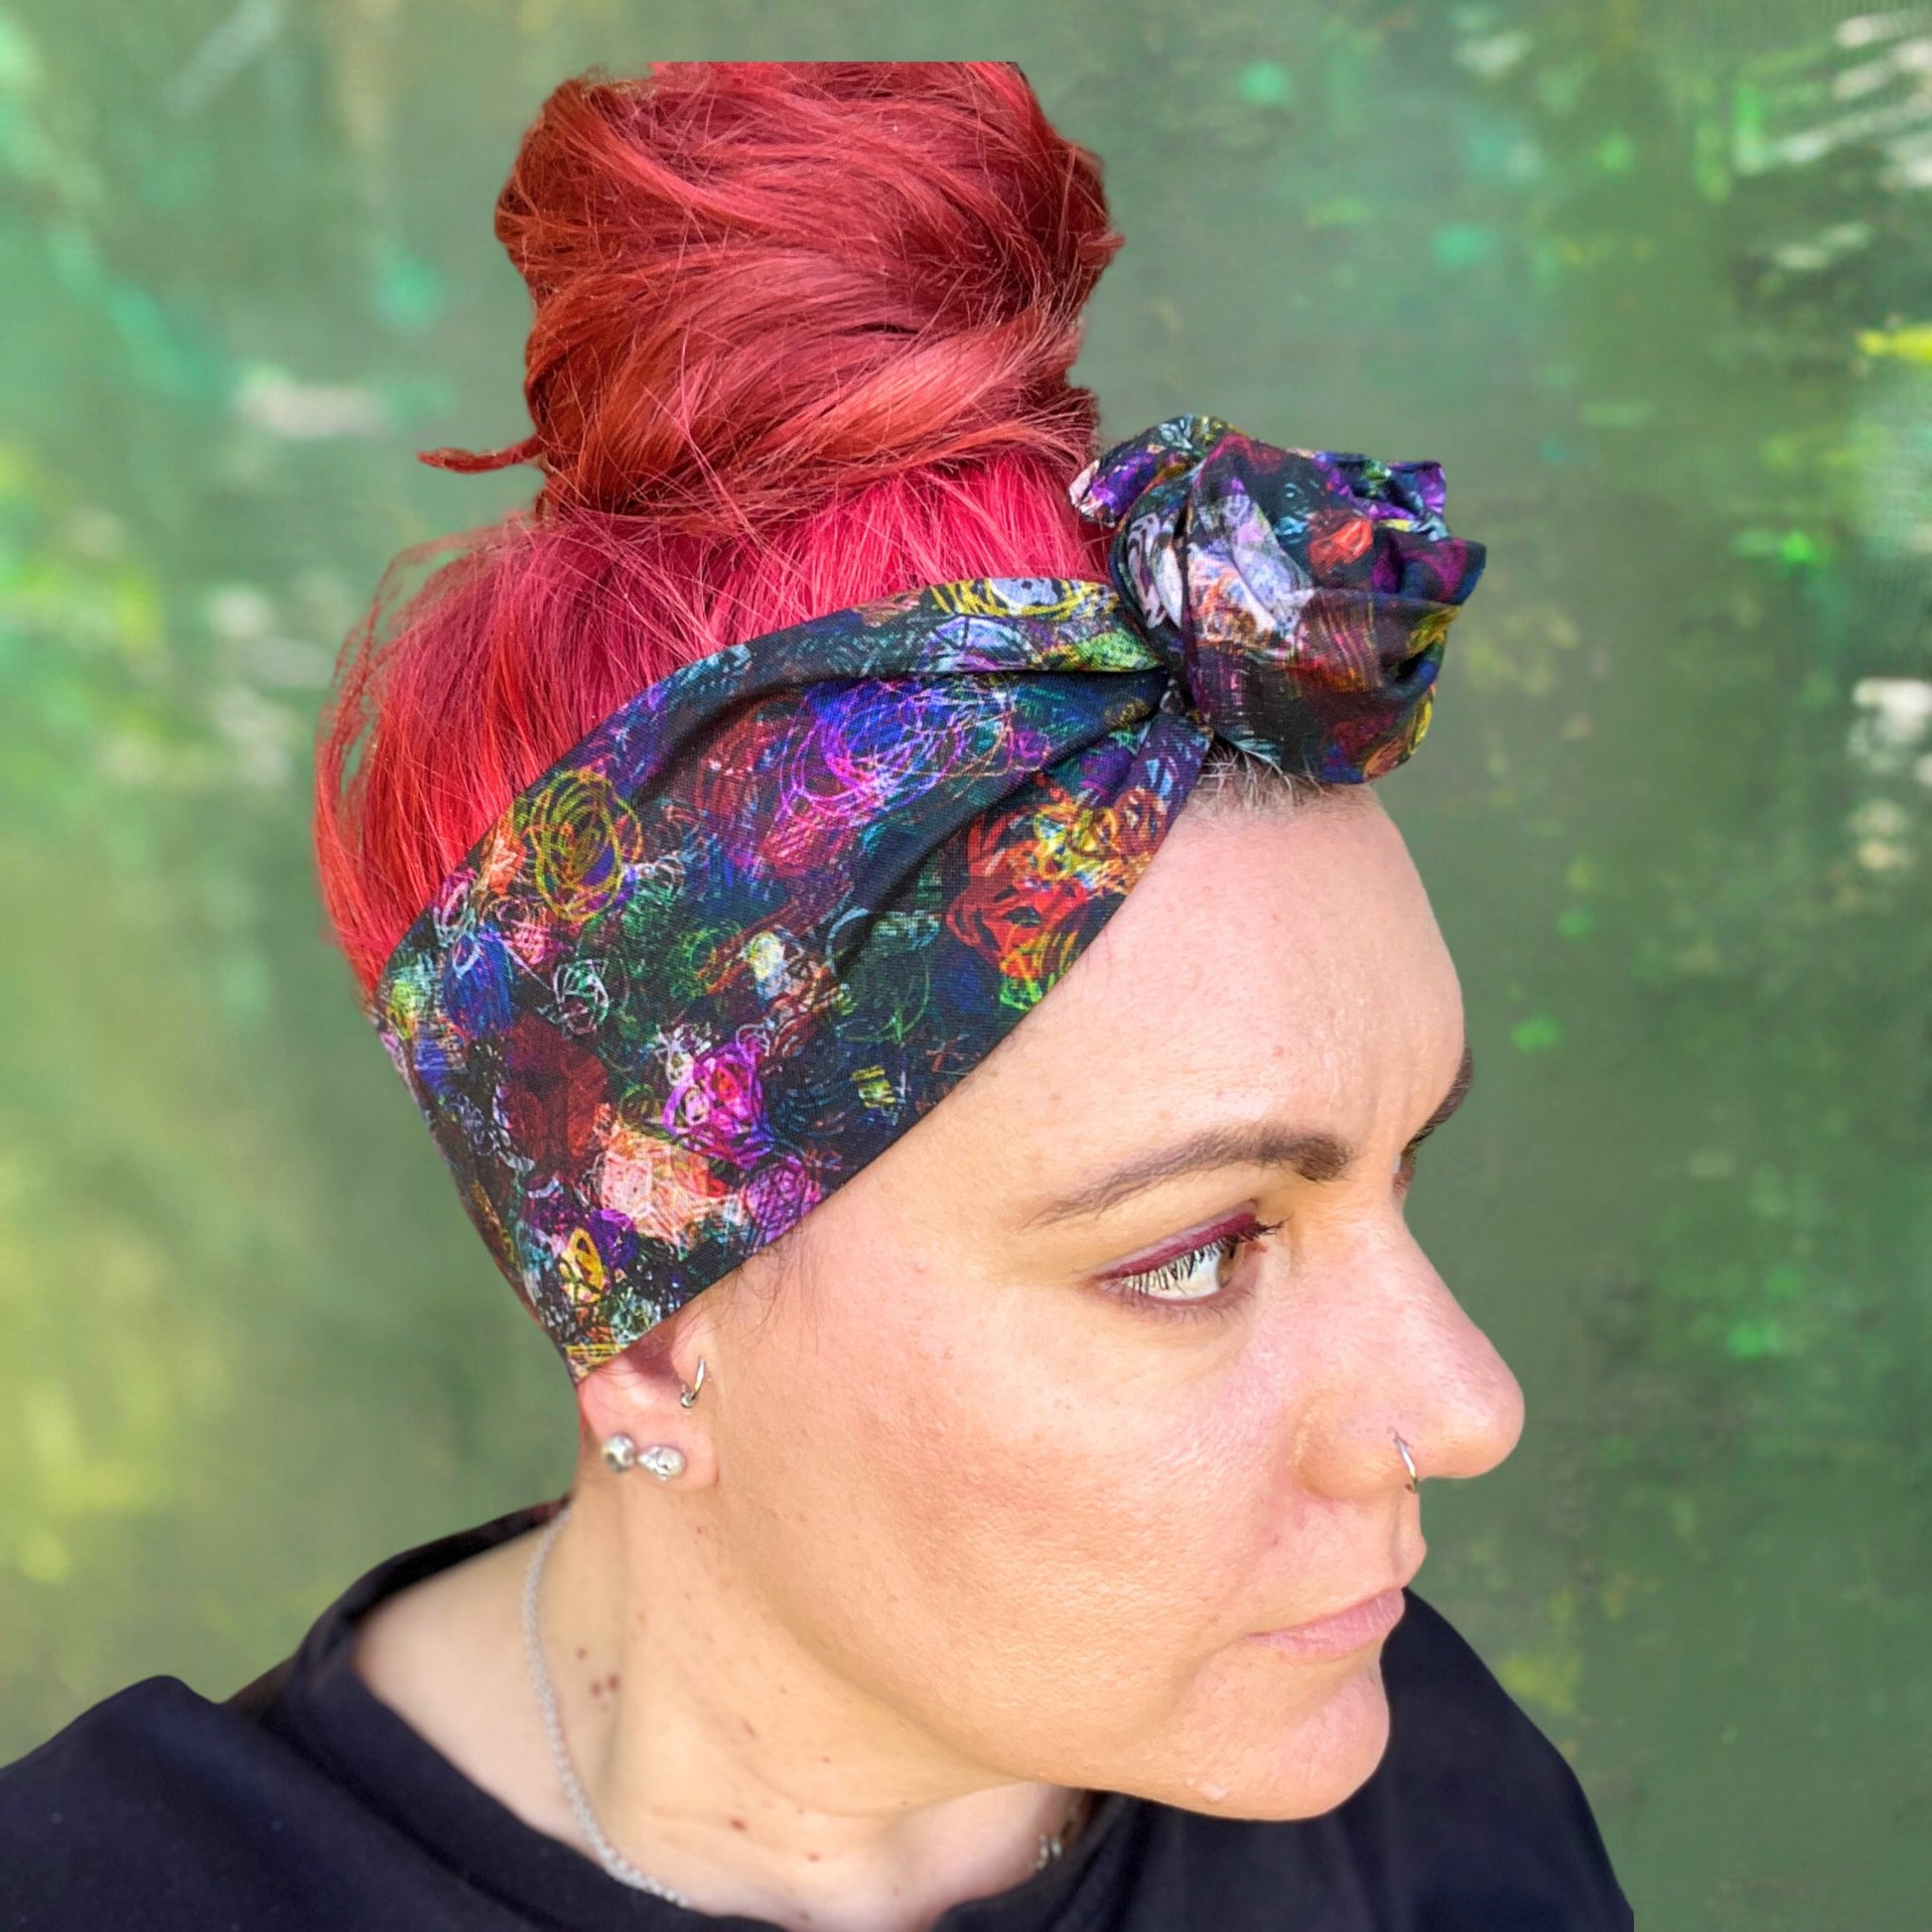 a colorful wire headwrap with a vibrant, abstract pattern. The headwrap is tied at the top, giving it a playful and chic bow effect.